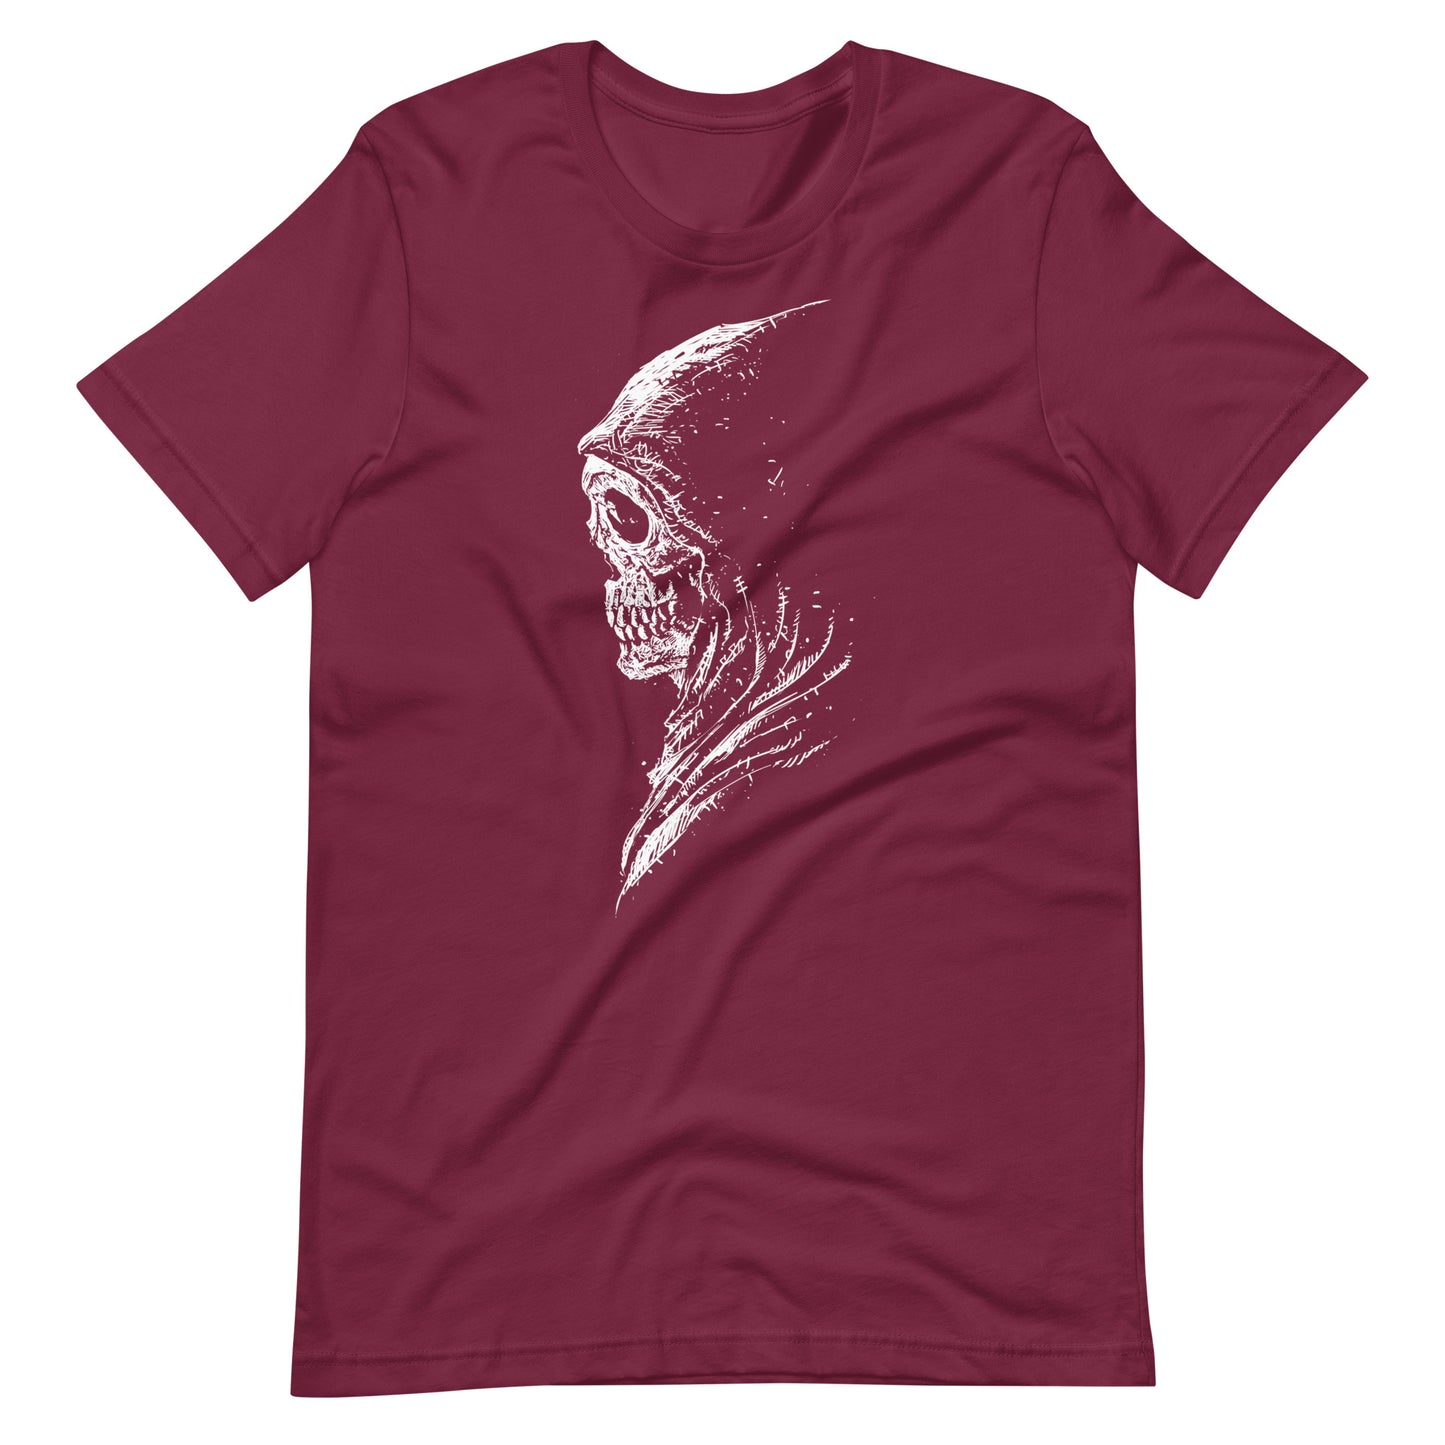 Muse - Men's t-shirt - Maroon Front